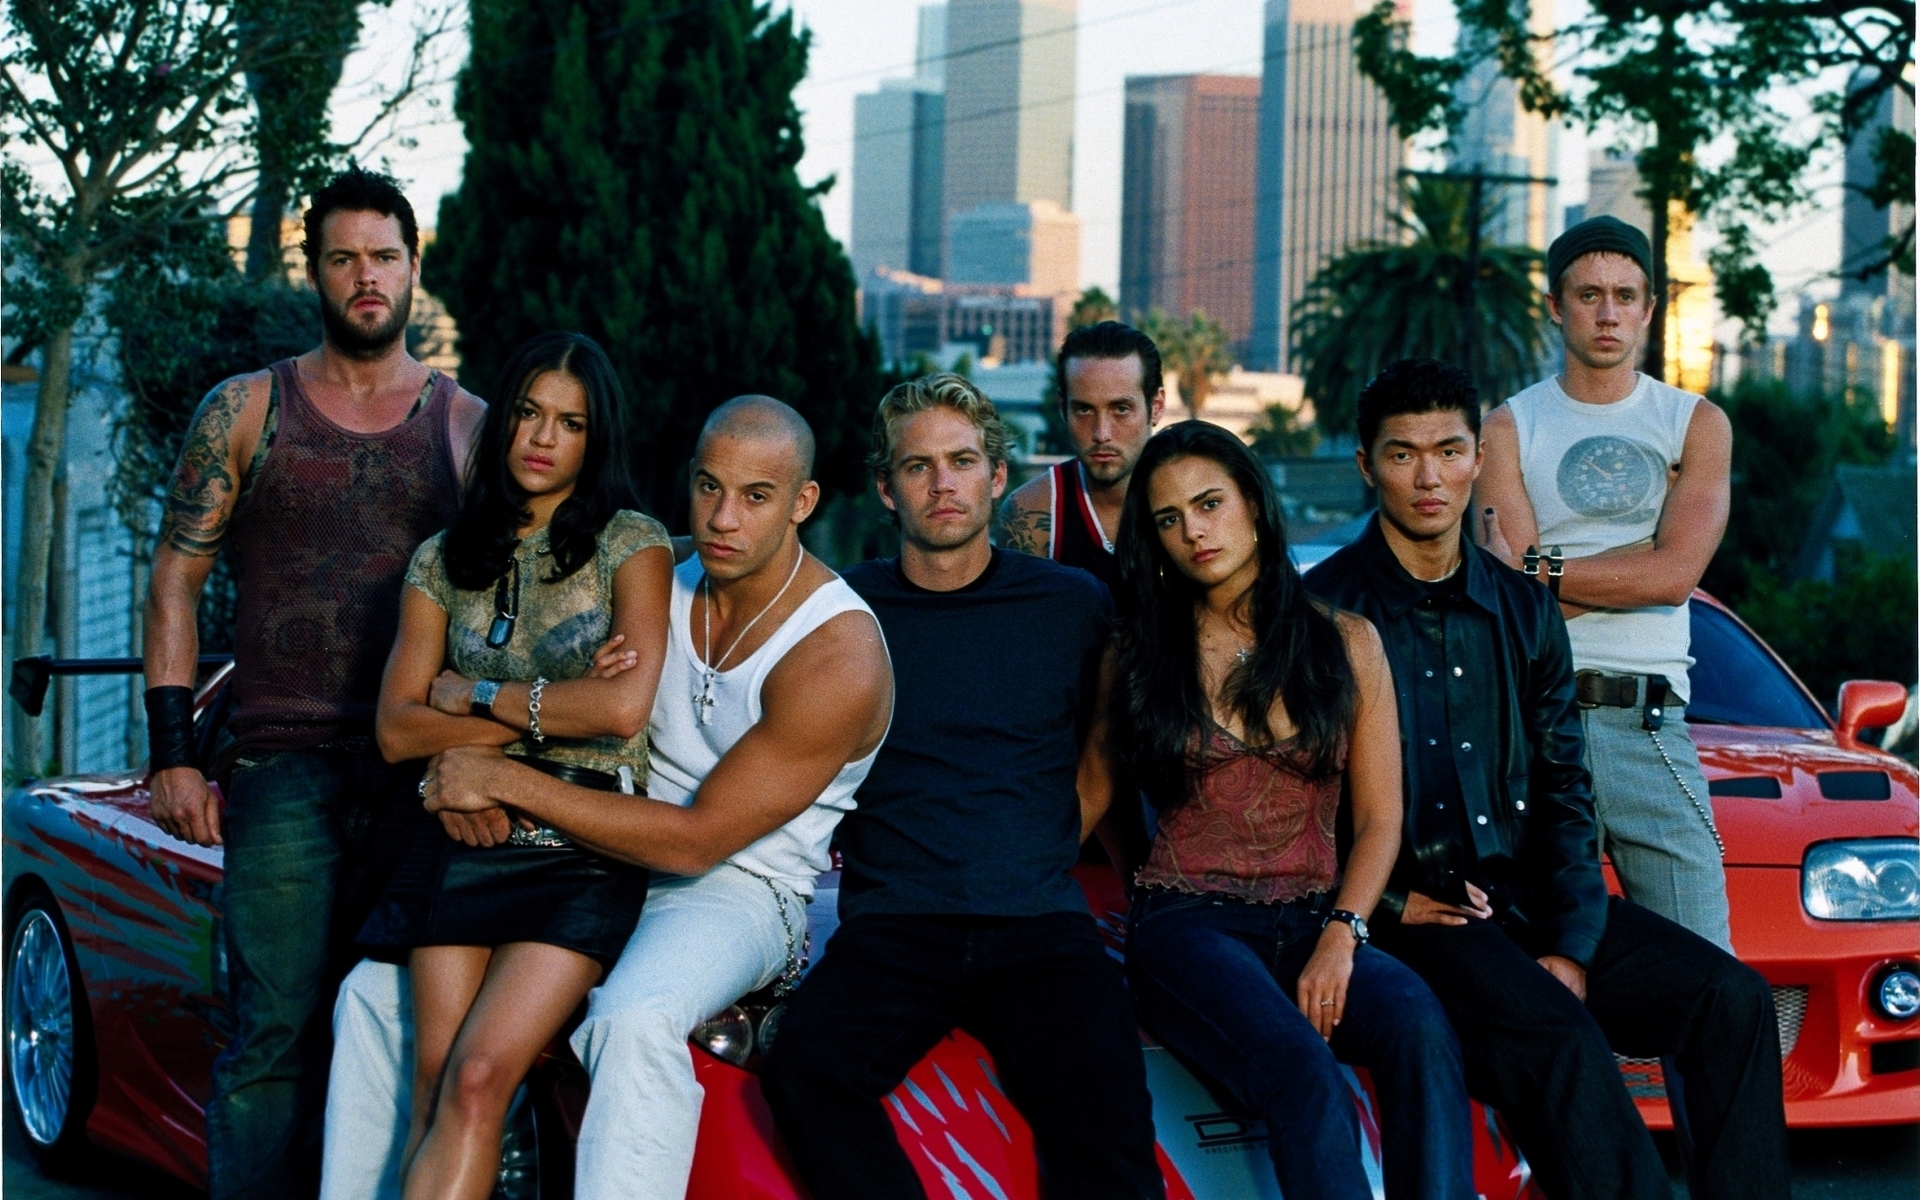 fast & furious, paul walker, the fast and the furious, matt schulze, dominic toretto, rick yune, letty ortiz, movie, brian o'conner, chad lindberg, jesse (the fast and the furious), johnny tran, jordana brewster, mia toretto, michelle rodriguez, vin diesel, vince (fast & furious) Free Stock Photo